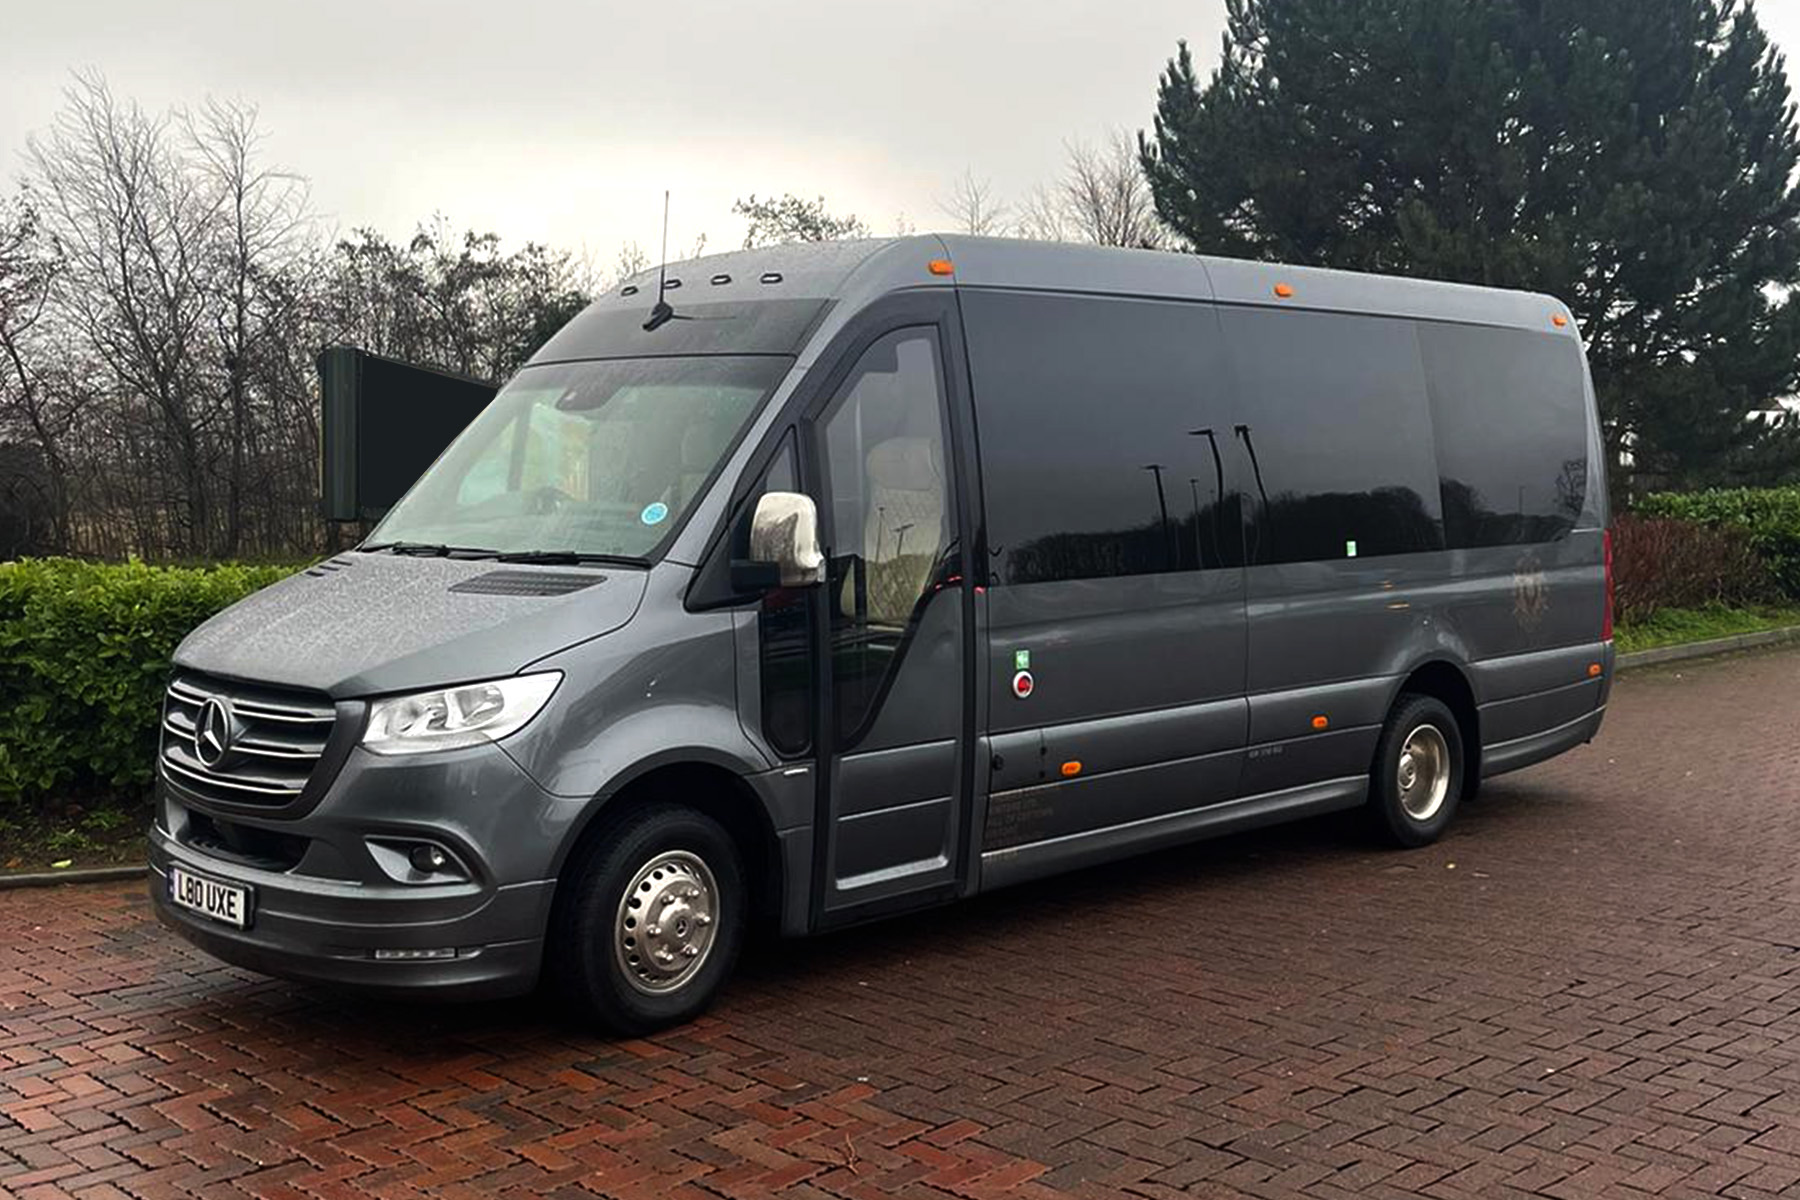 5 Reasons to Hire a Minibus for Your Next Group Outing